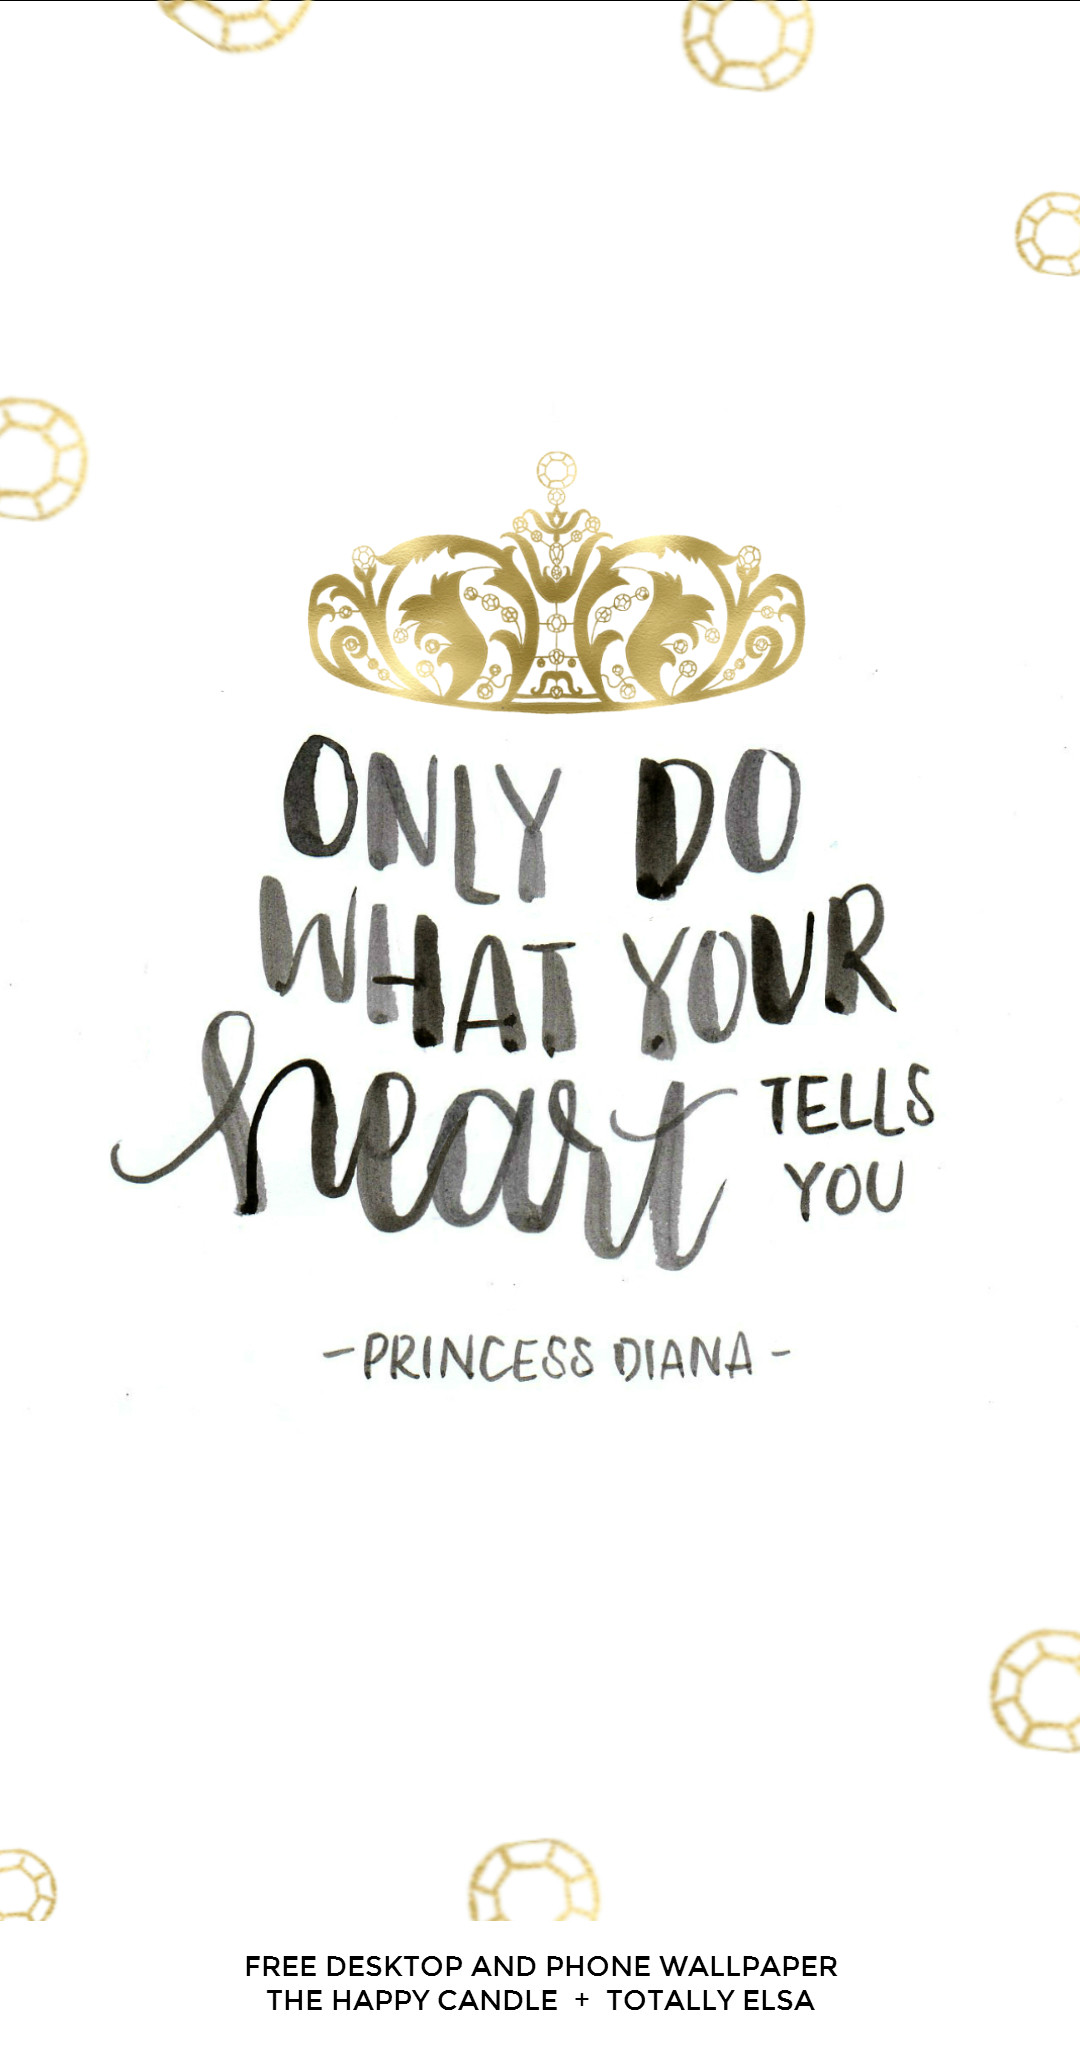 1080x2050 A free desktop and phone wallpaper with a quote from Princess Diana /  Created by The